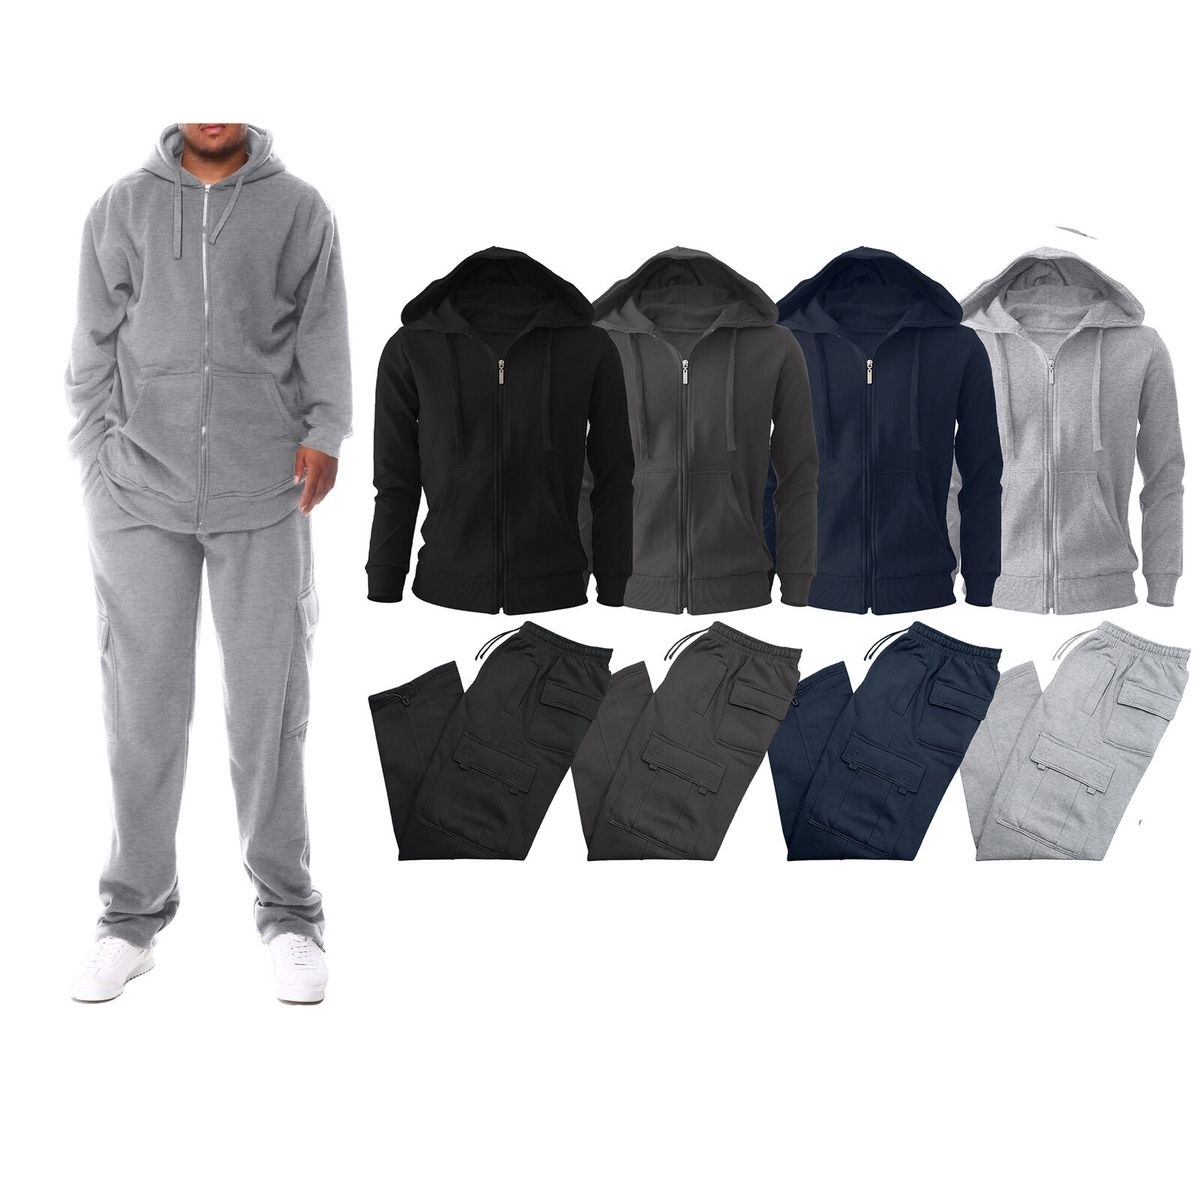 Multi-Pack: Men's Big & Tall Winter Warm Athletic Active Cozy Fleece Lined Multi-Pocket Full Zip Up Cargo Tracksuit - Charcoal, 1-pack, 3xl